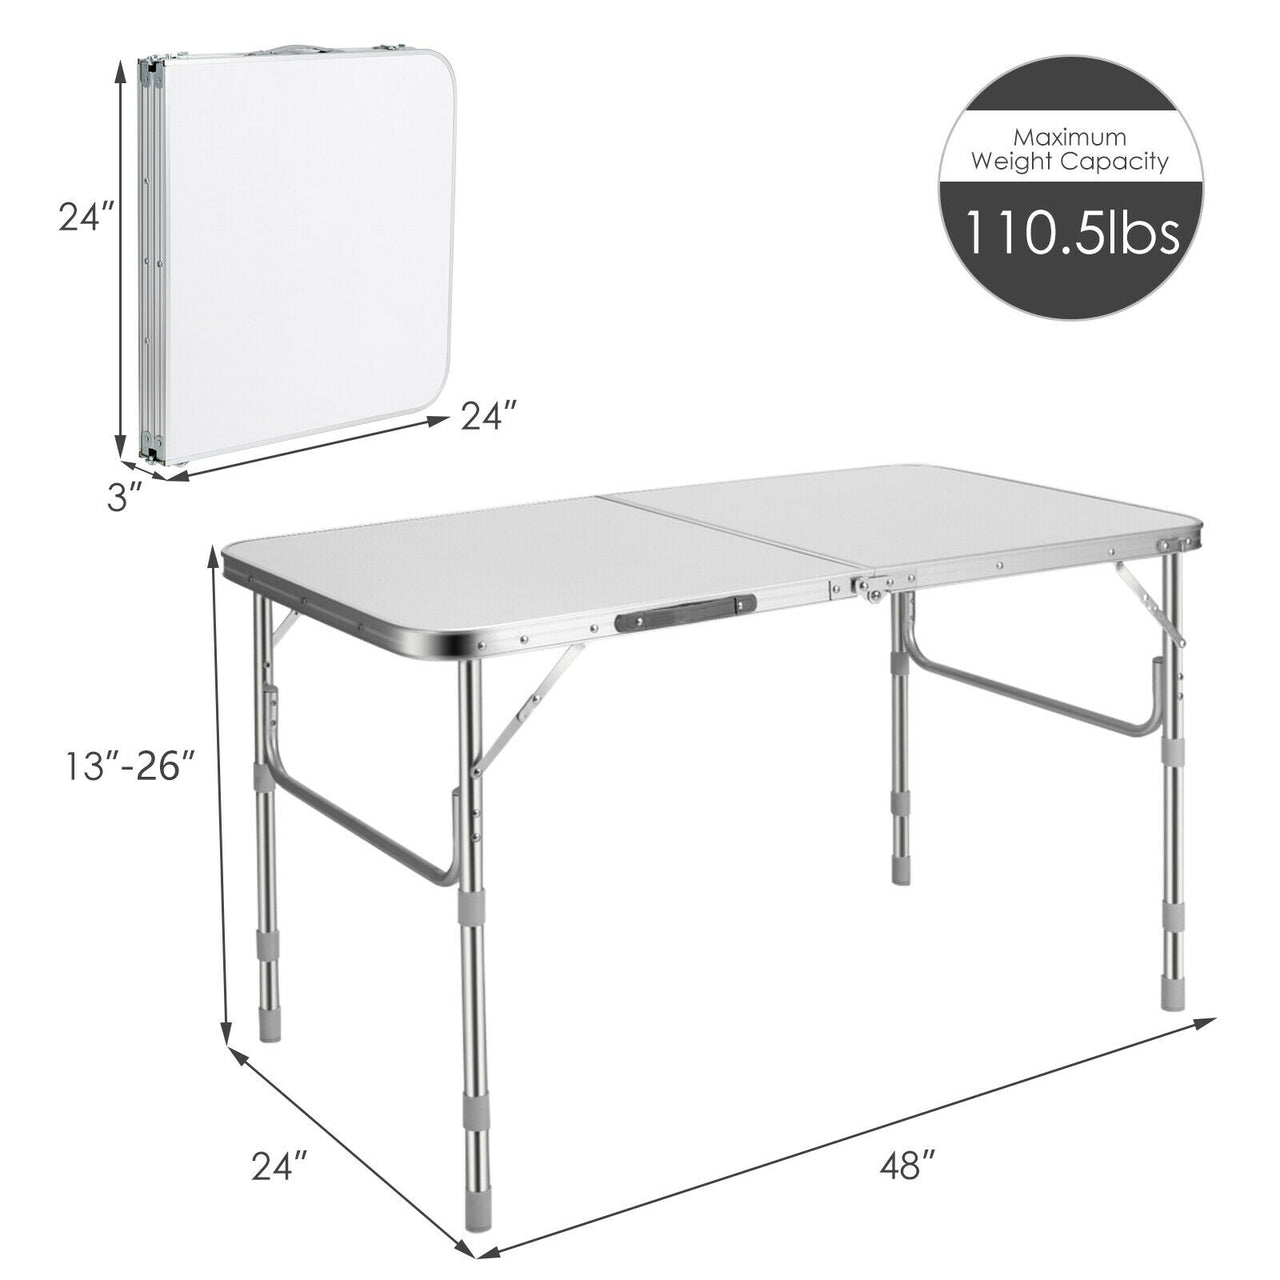 2 Pieces Folding Utility Table with Carrying Handle - Gallery View 4 of 9